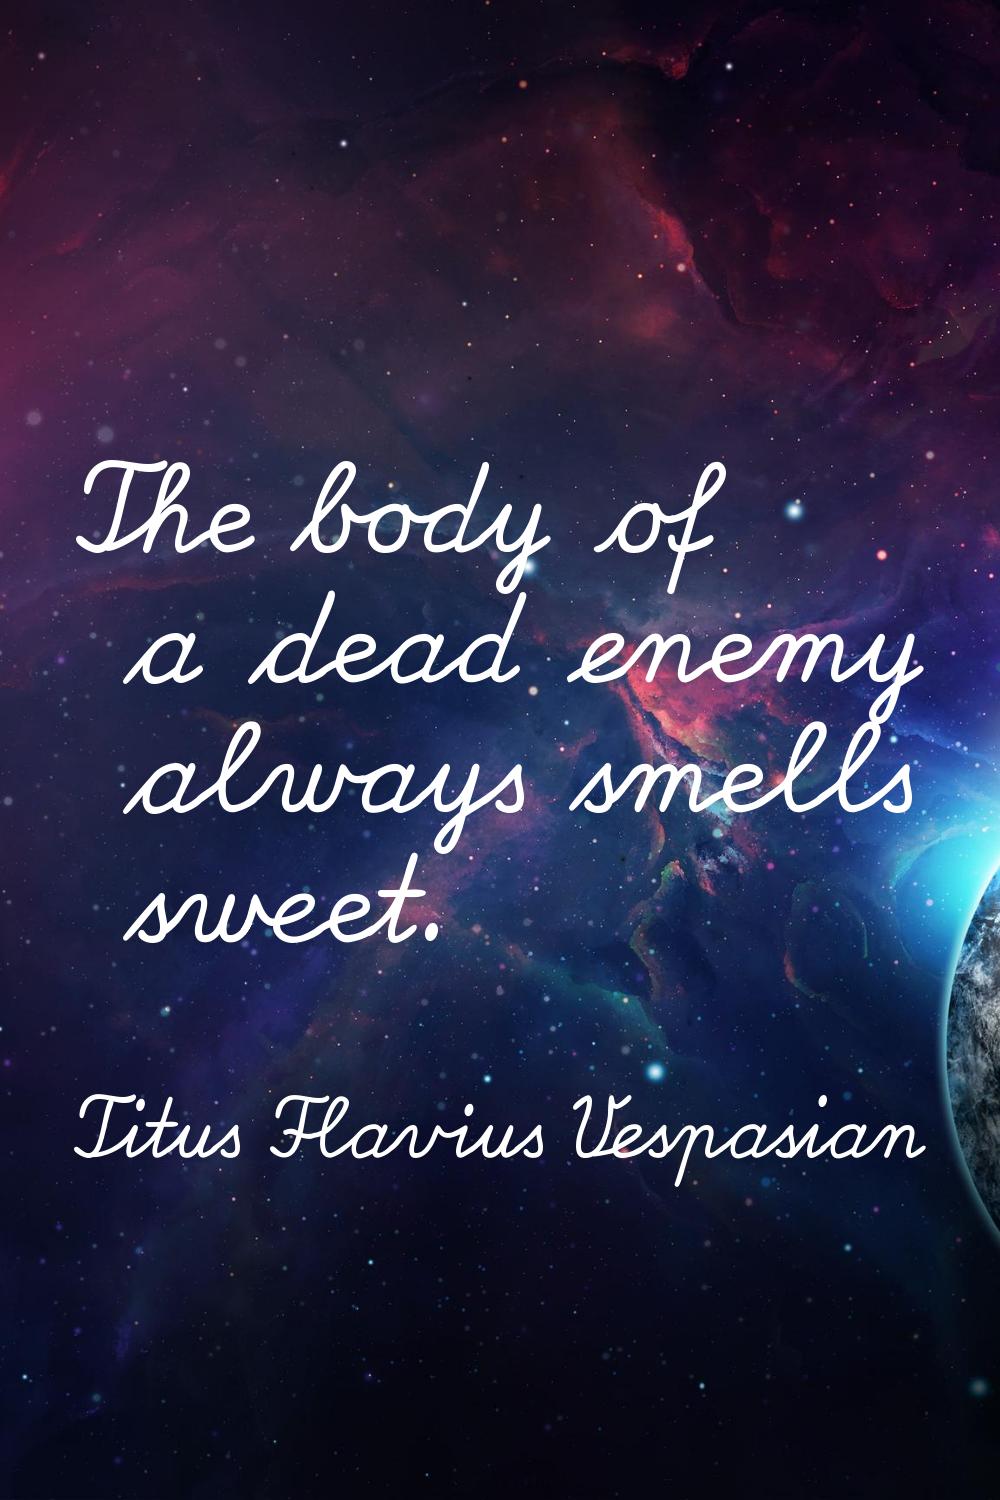 The body of a dead enemy always smells sweet.